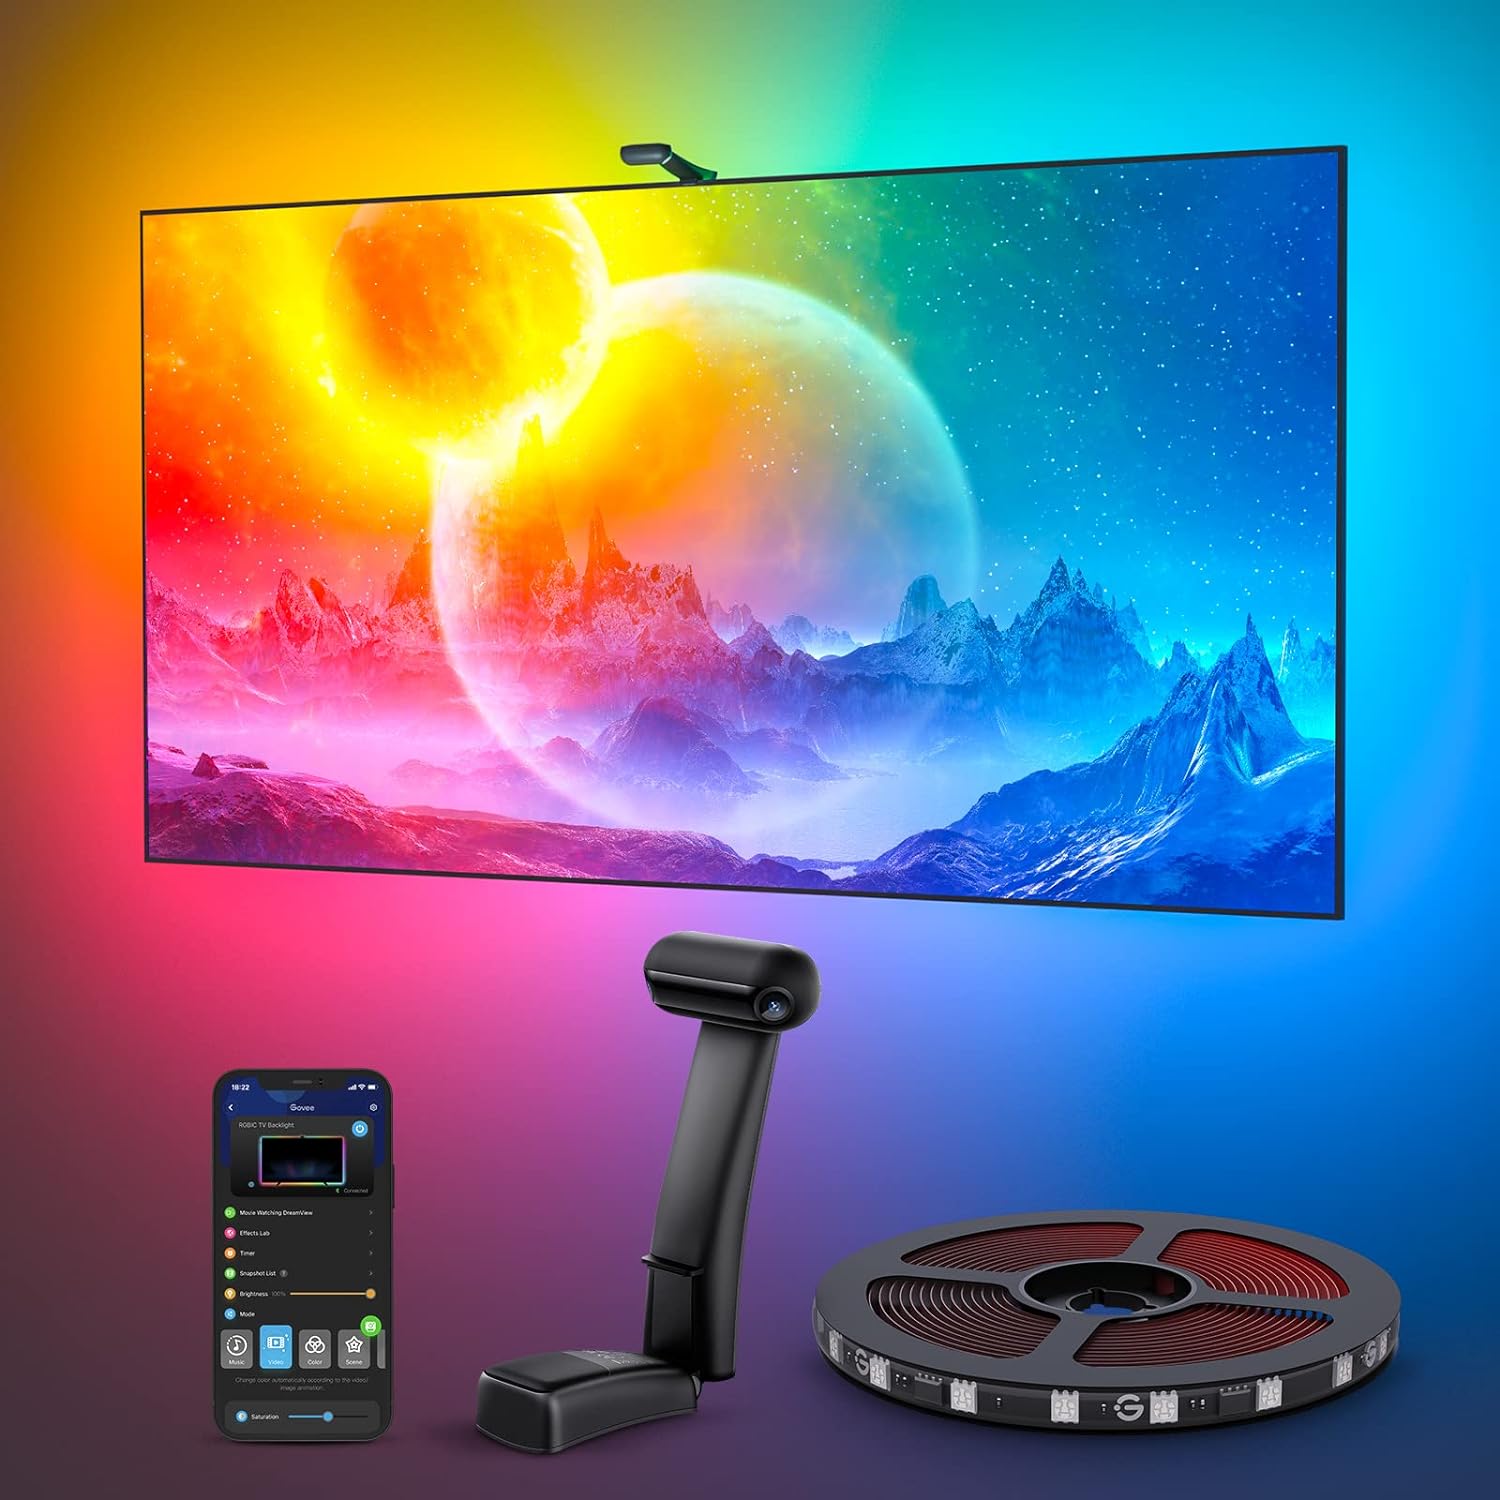 Govee Envisual TV Backlight T2 with Dual Cameras, 16.4ft RGBIC Wi-Fi LED for 75-85 inch TVs, Works Alexa and Google Assistant, Smart App Control, Music Sync Lights, Adapter, (H605C)